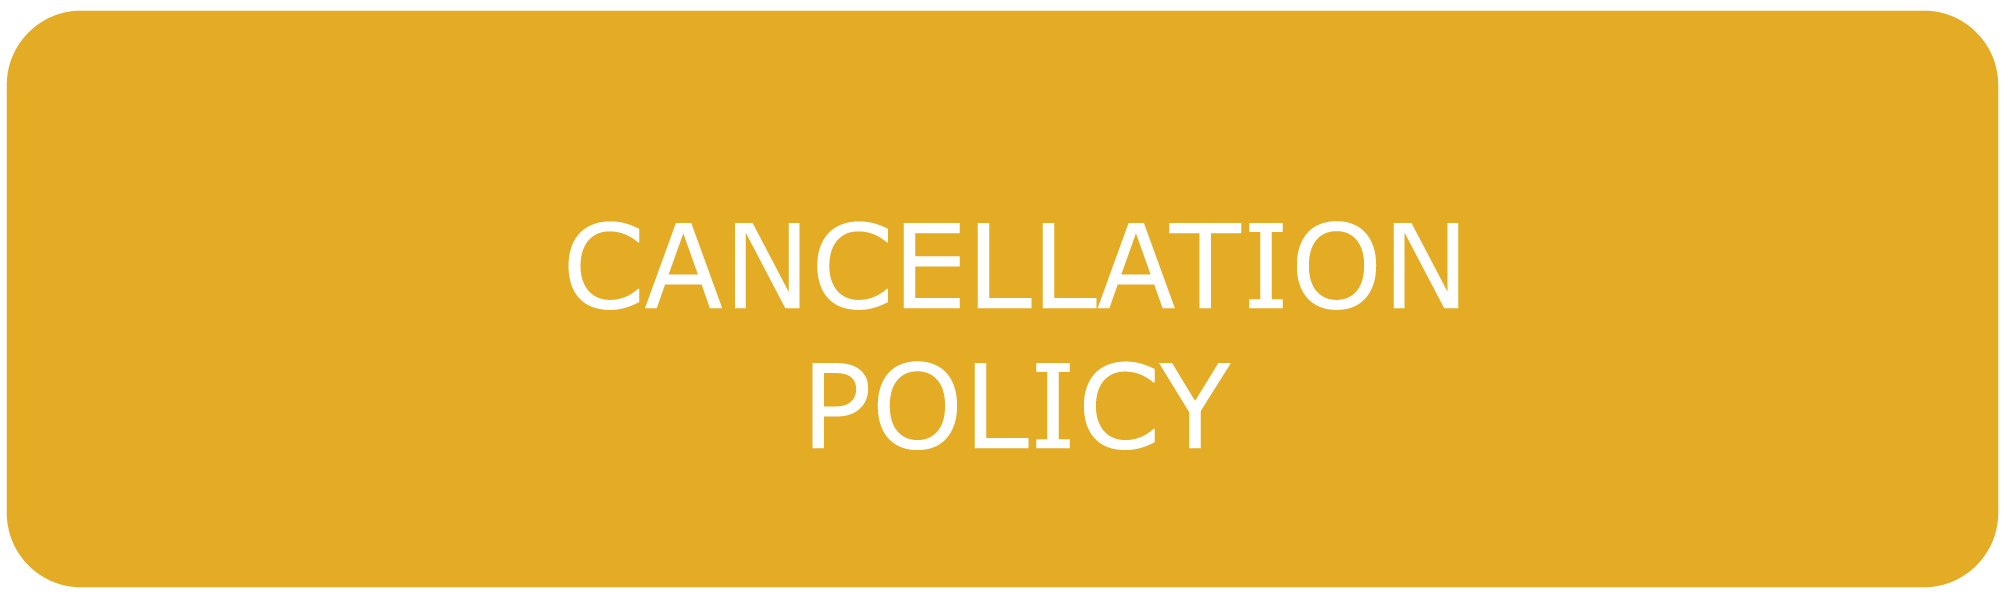 Cancellation Policy Button Graphic